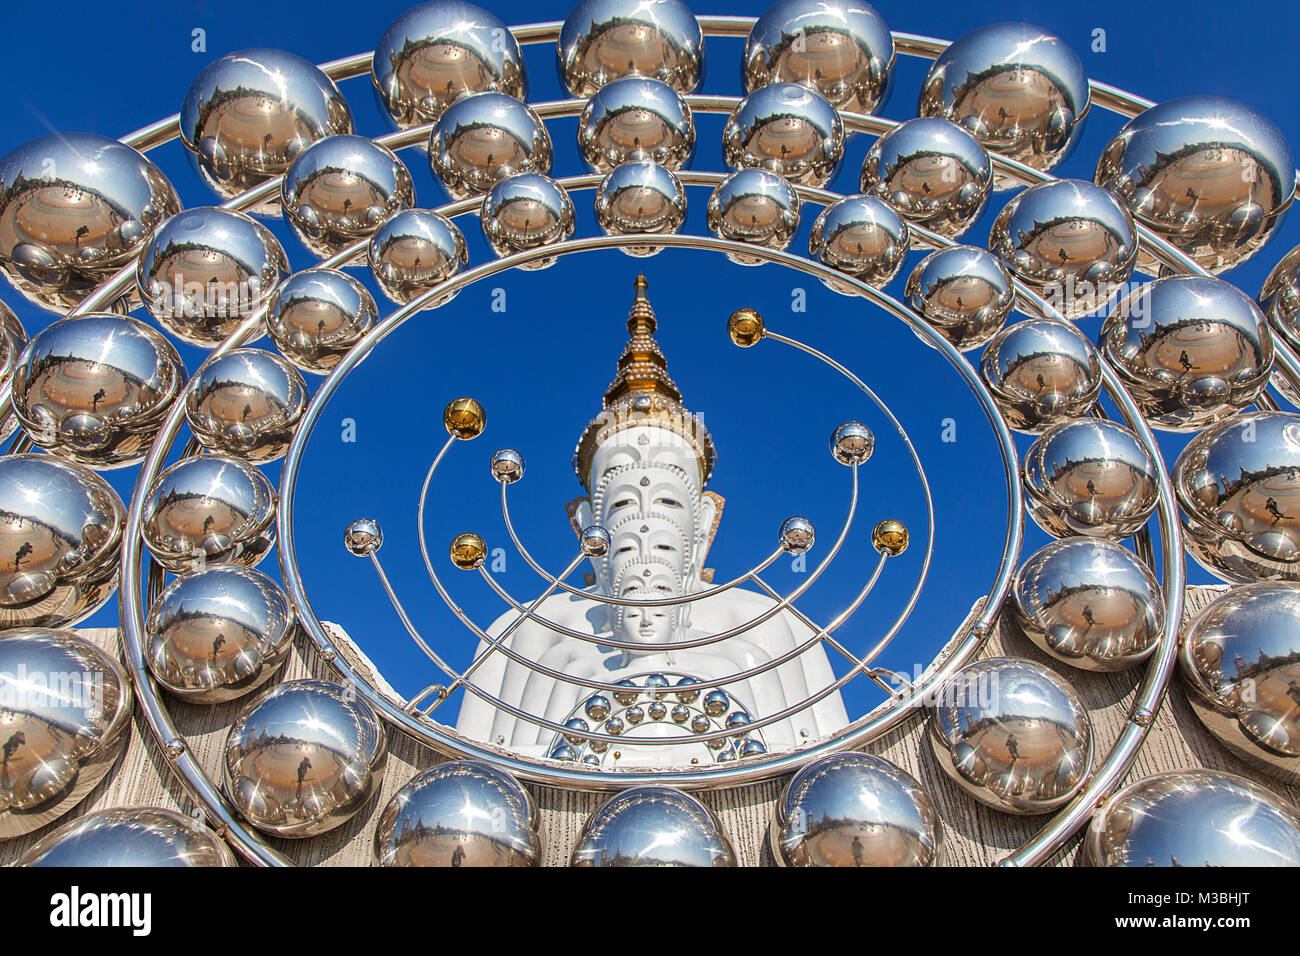 Buddha statues at a Buddhist temple in Thailand Stock Photo